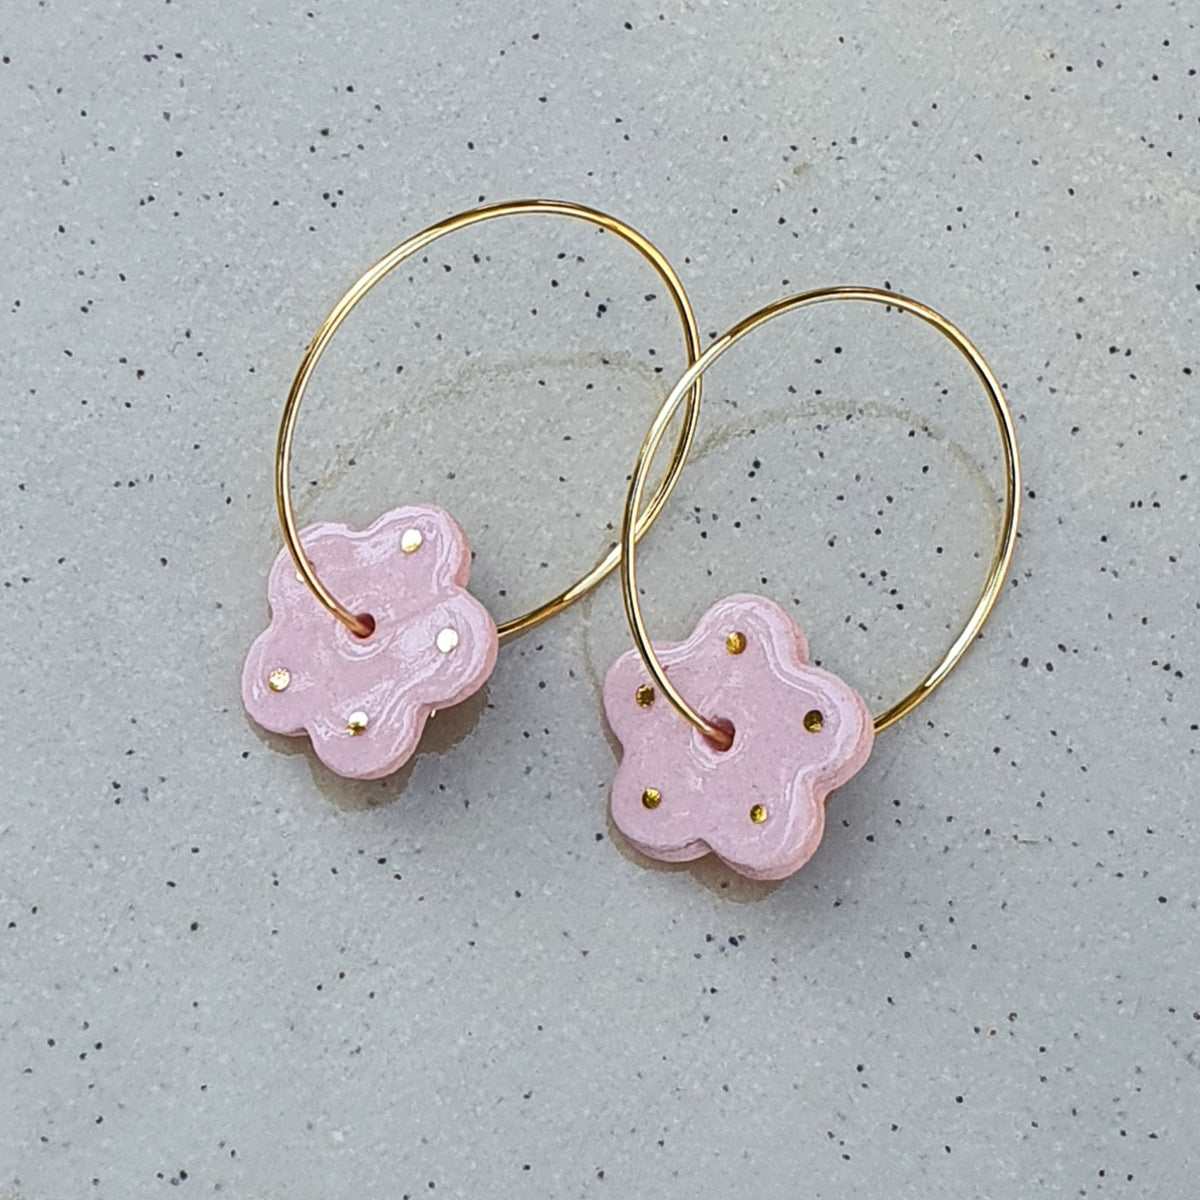 Blossom hoops - pink , gold dots